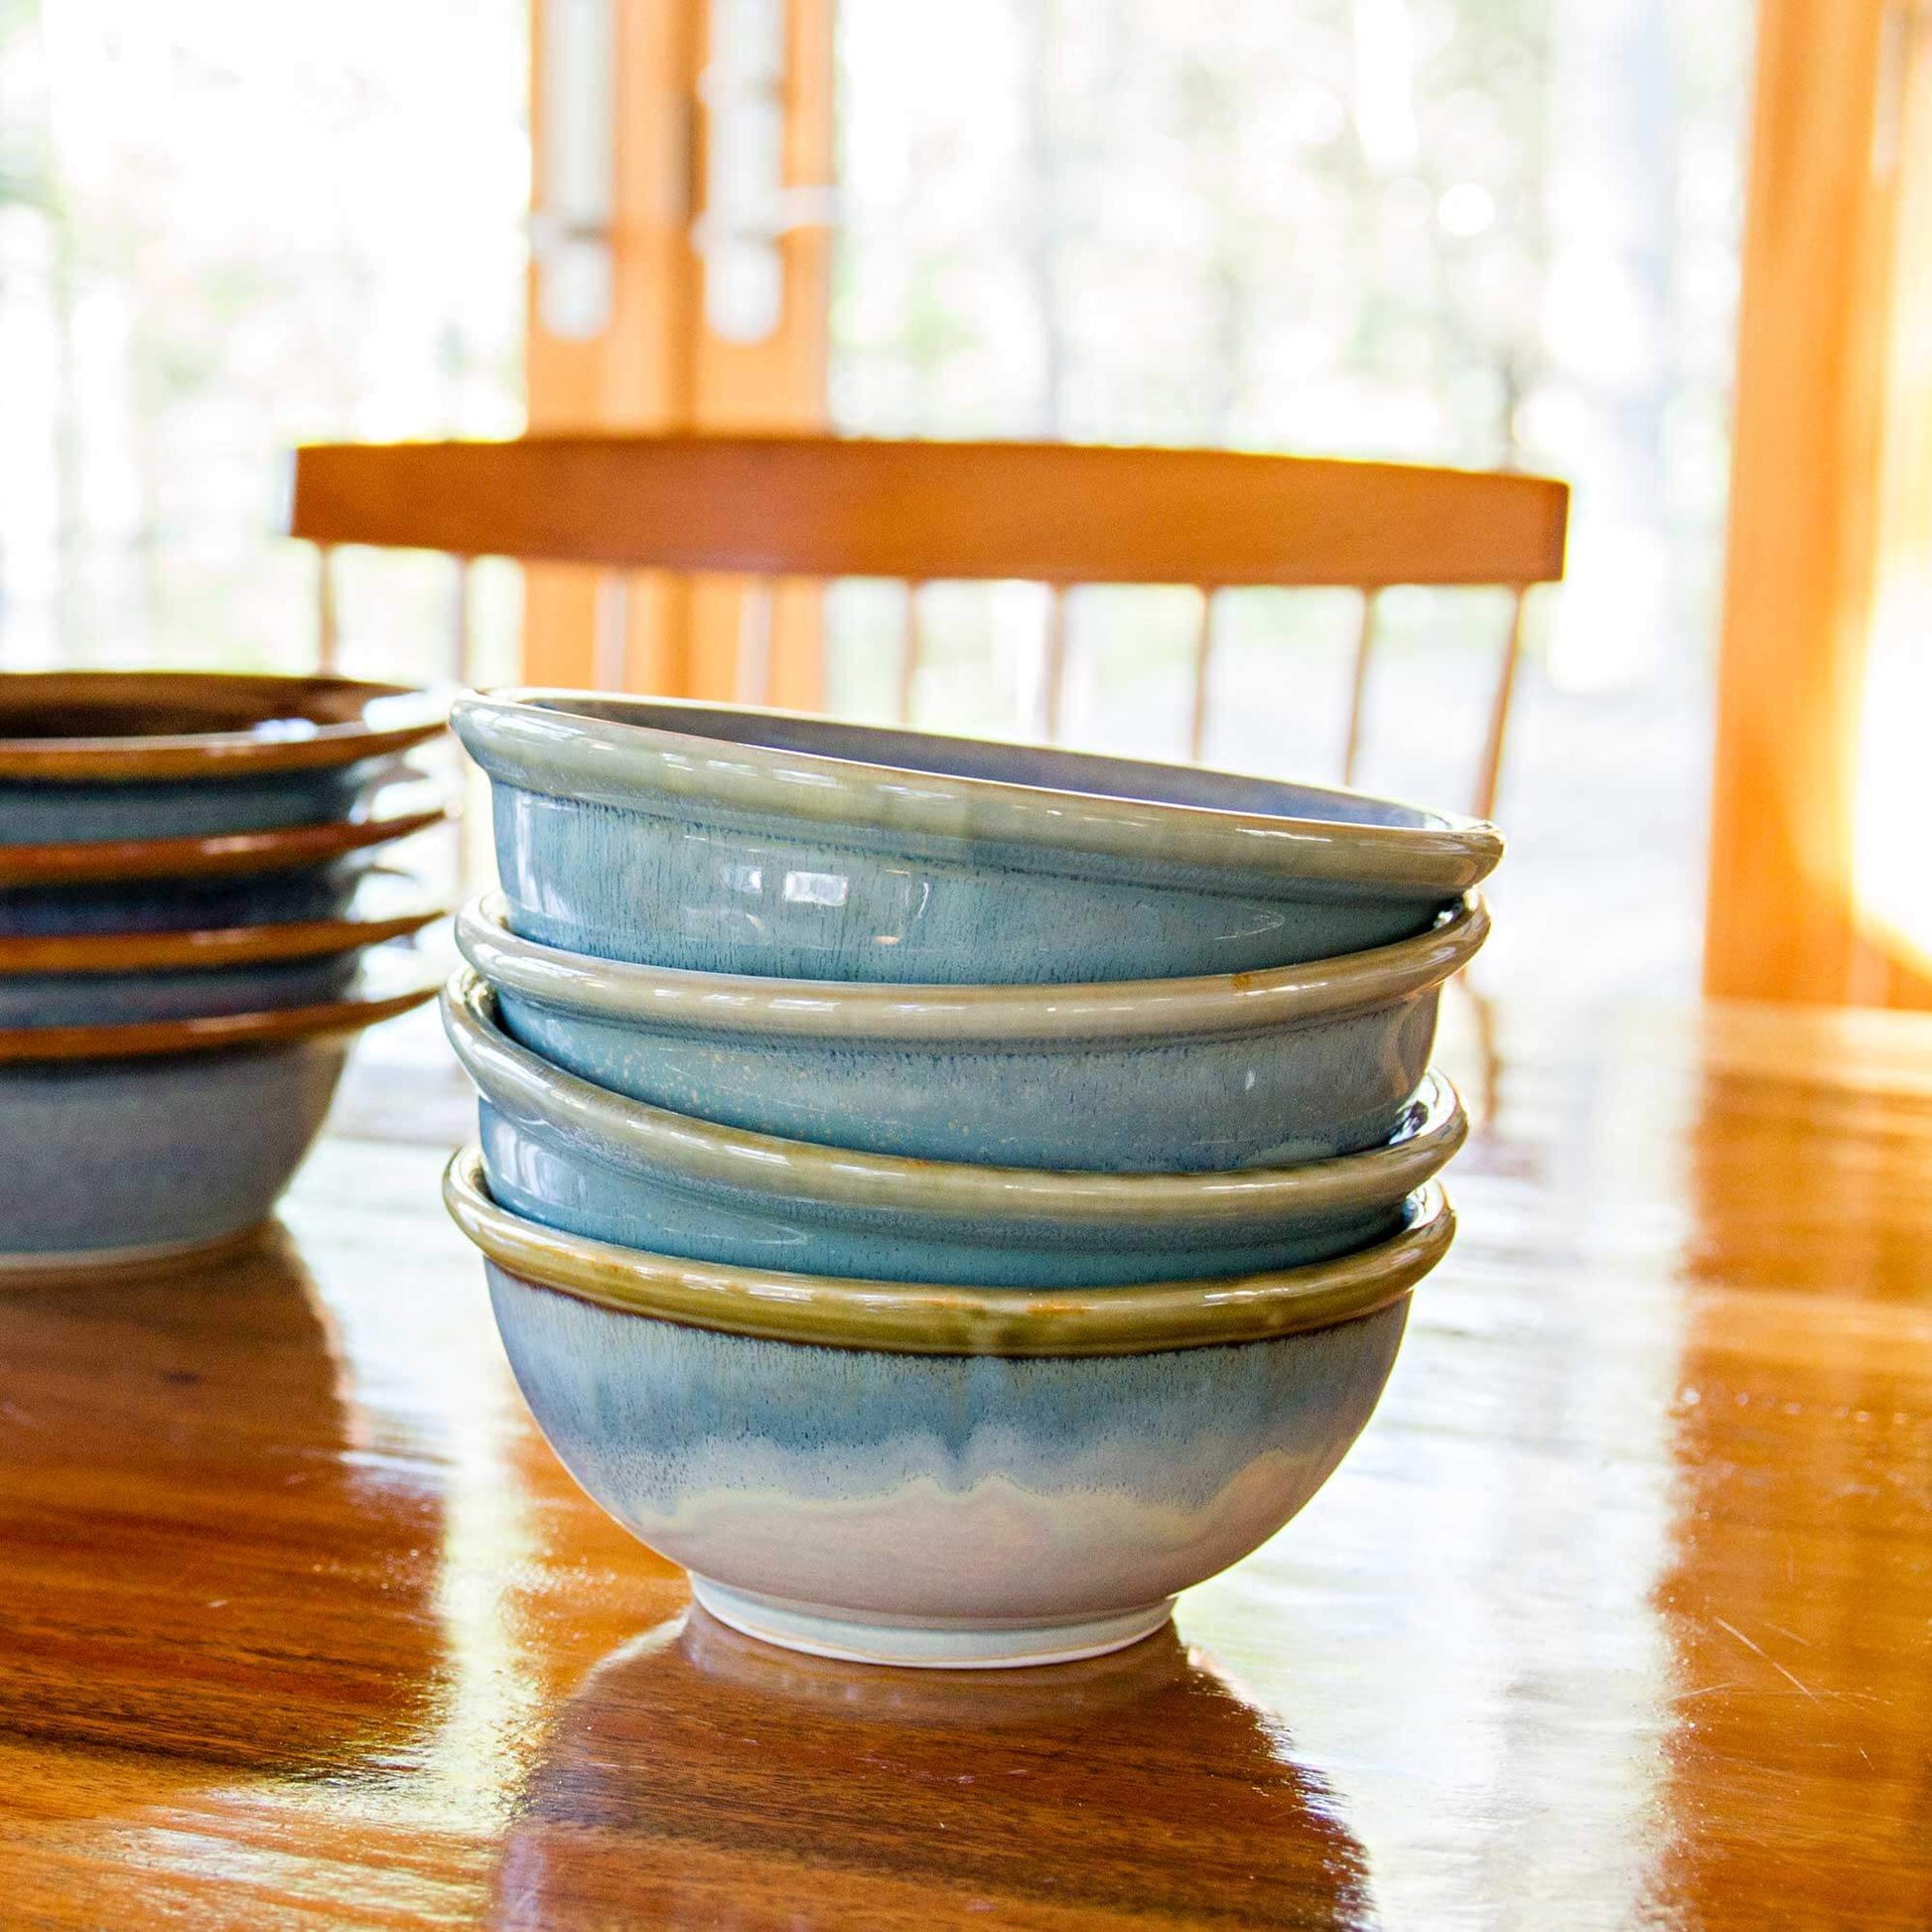 Handmade Pottery Cereal Bowl in Ivory & Blue pattern made by Georgetown Pottery in Maine